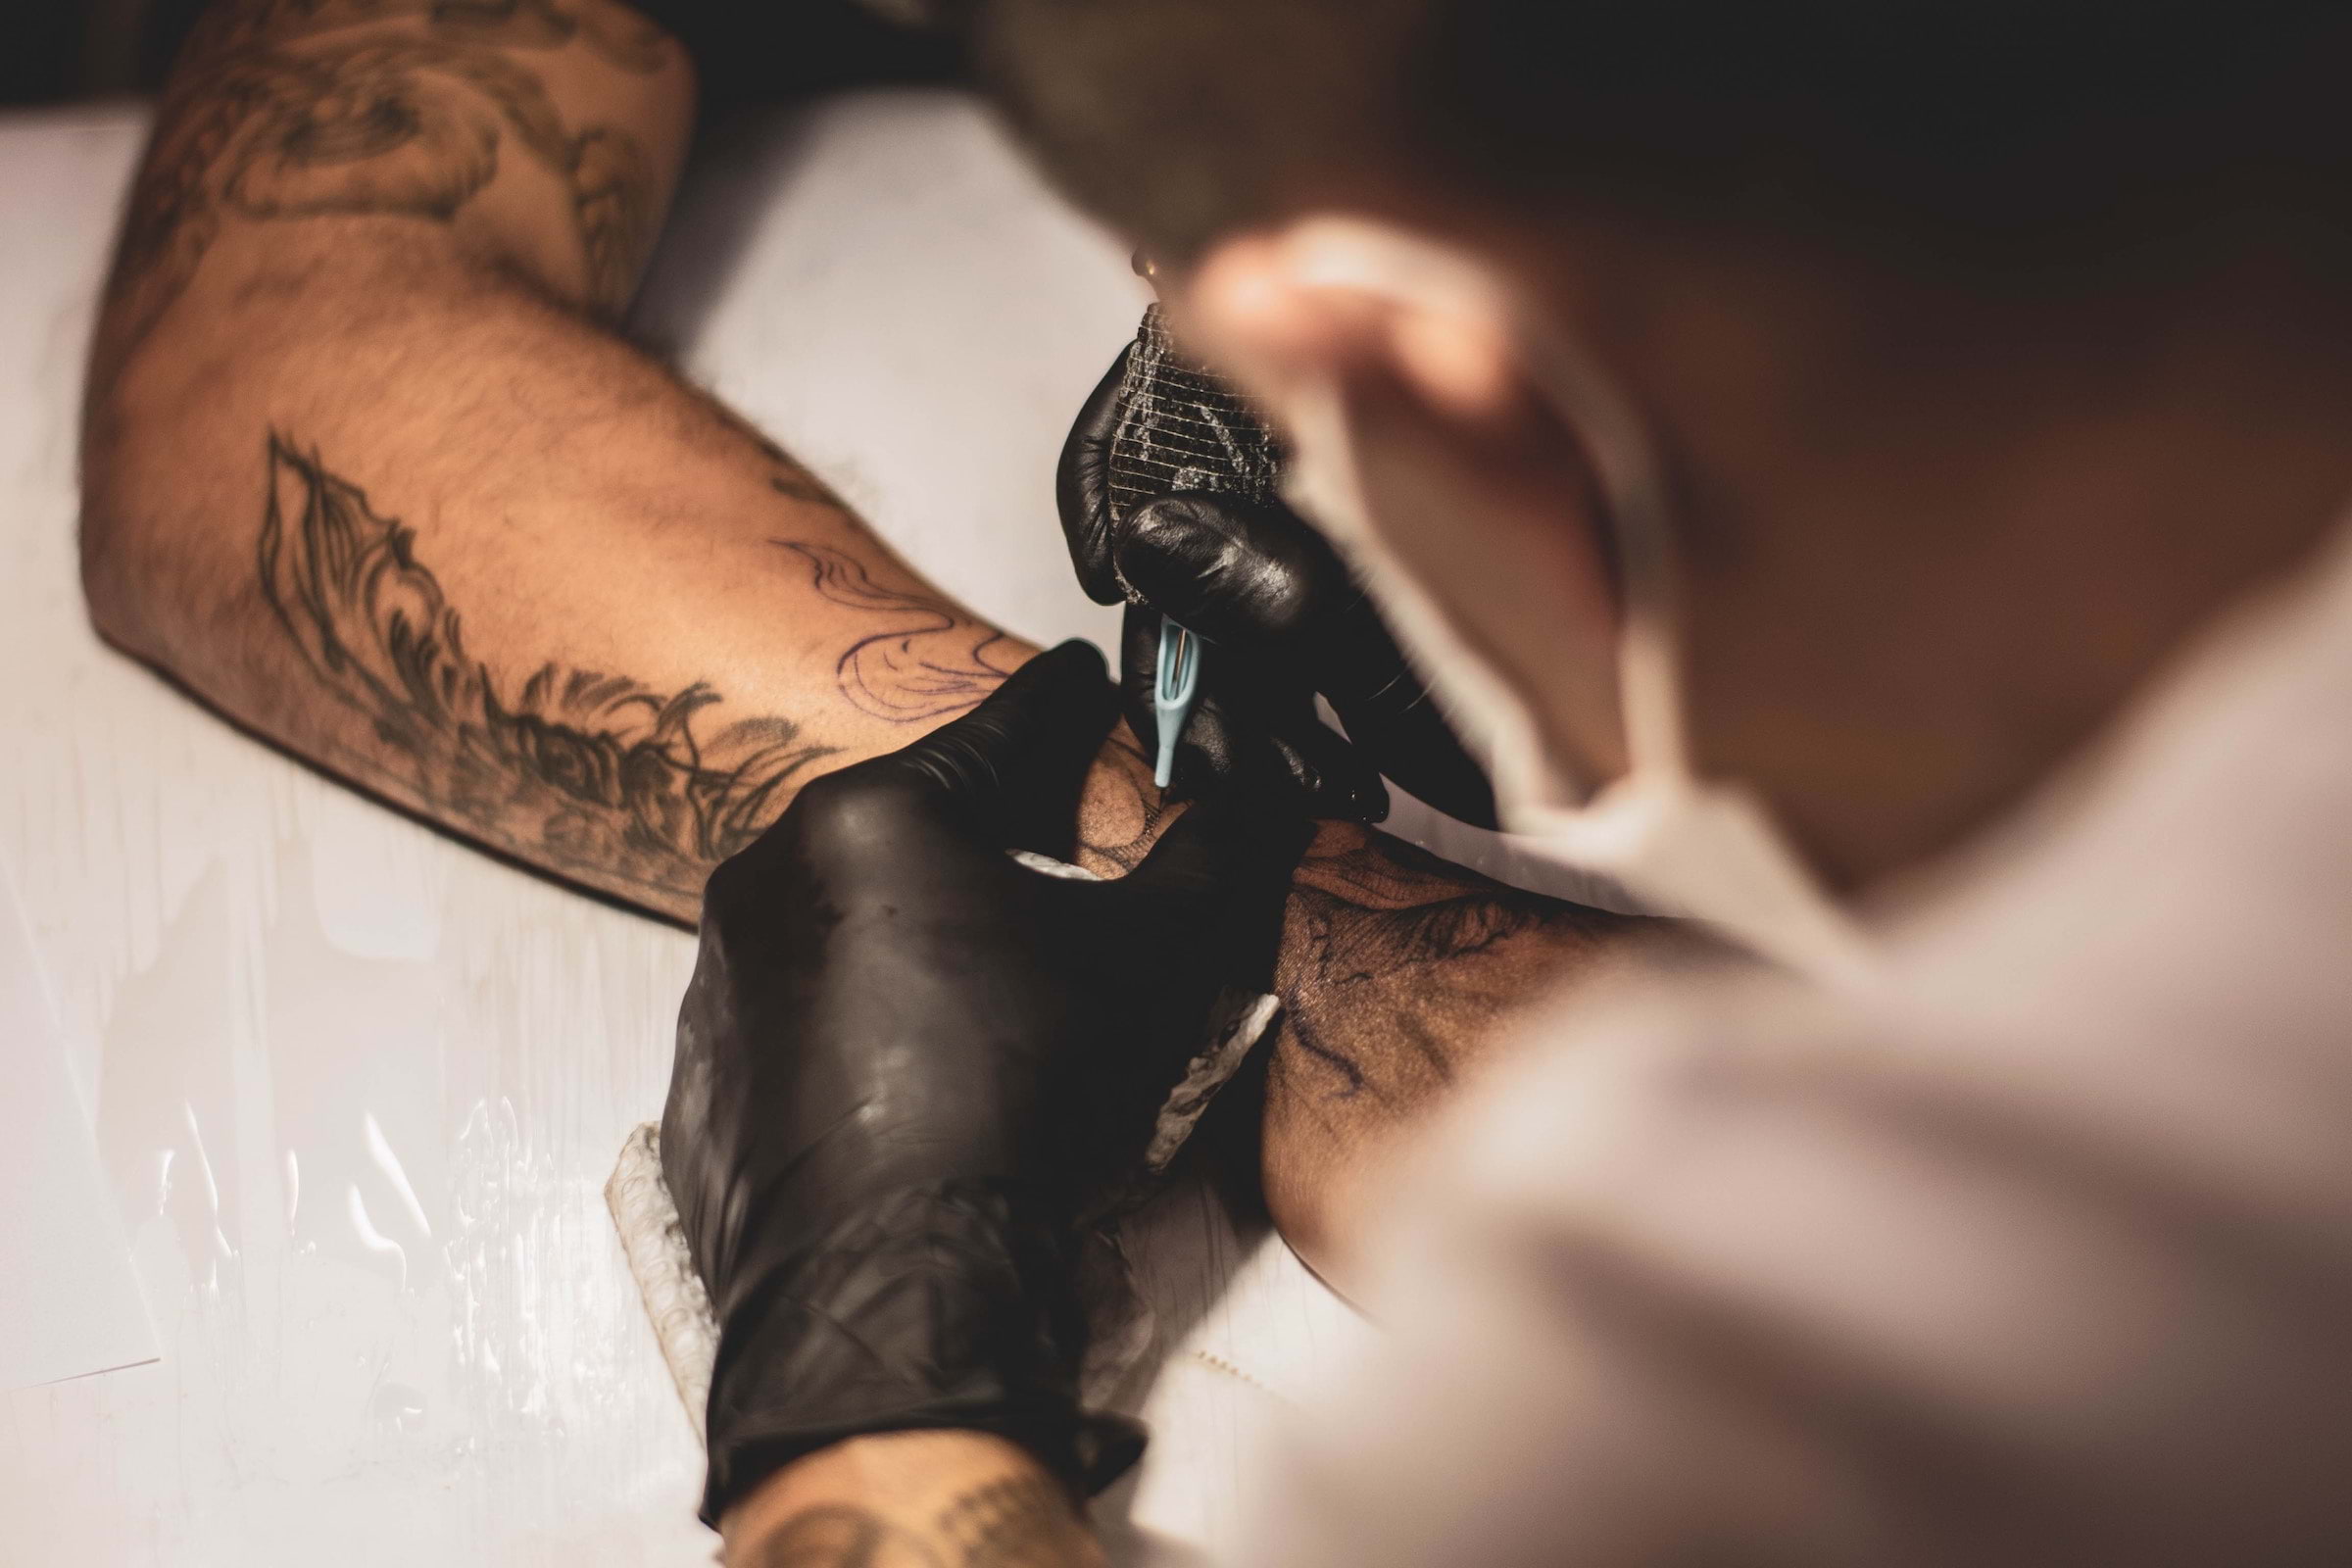 Guide to Stockholm's best tattoo studios – Thatsup